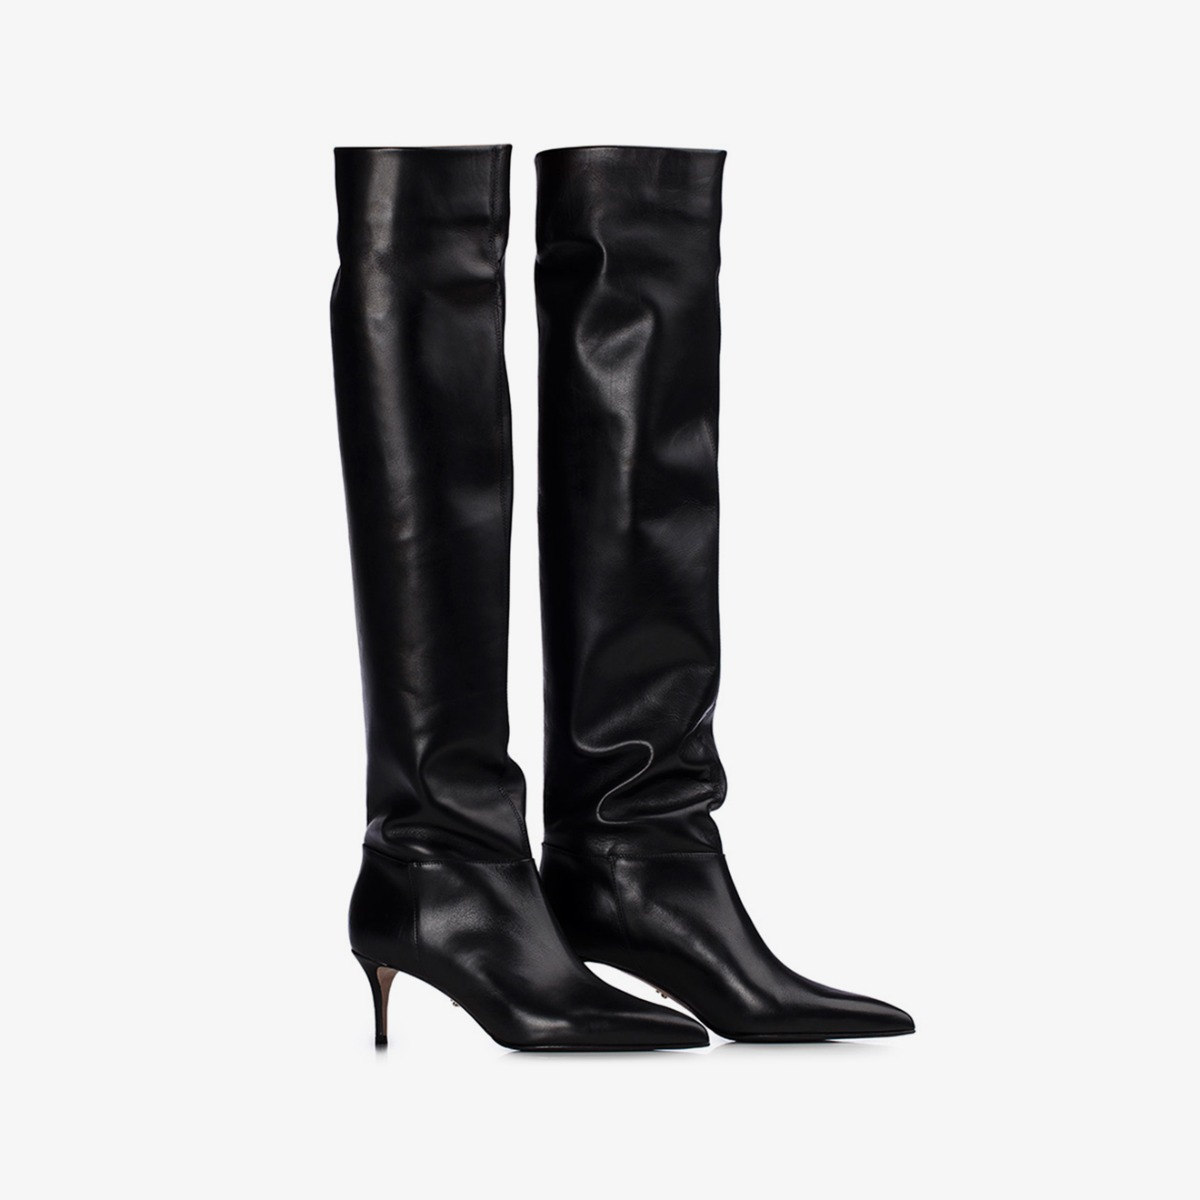 EVA BOOT 60 mm - Le Silla official outlet